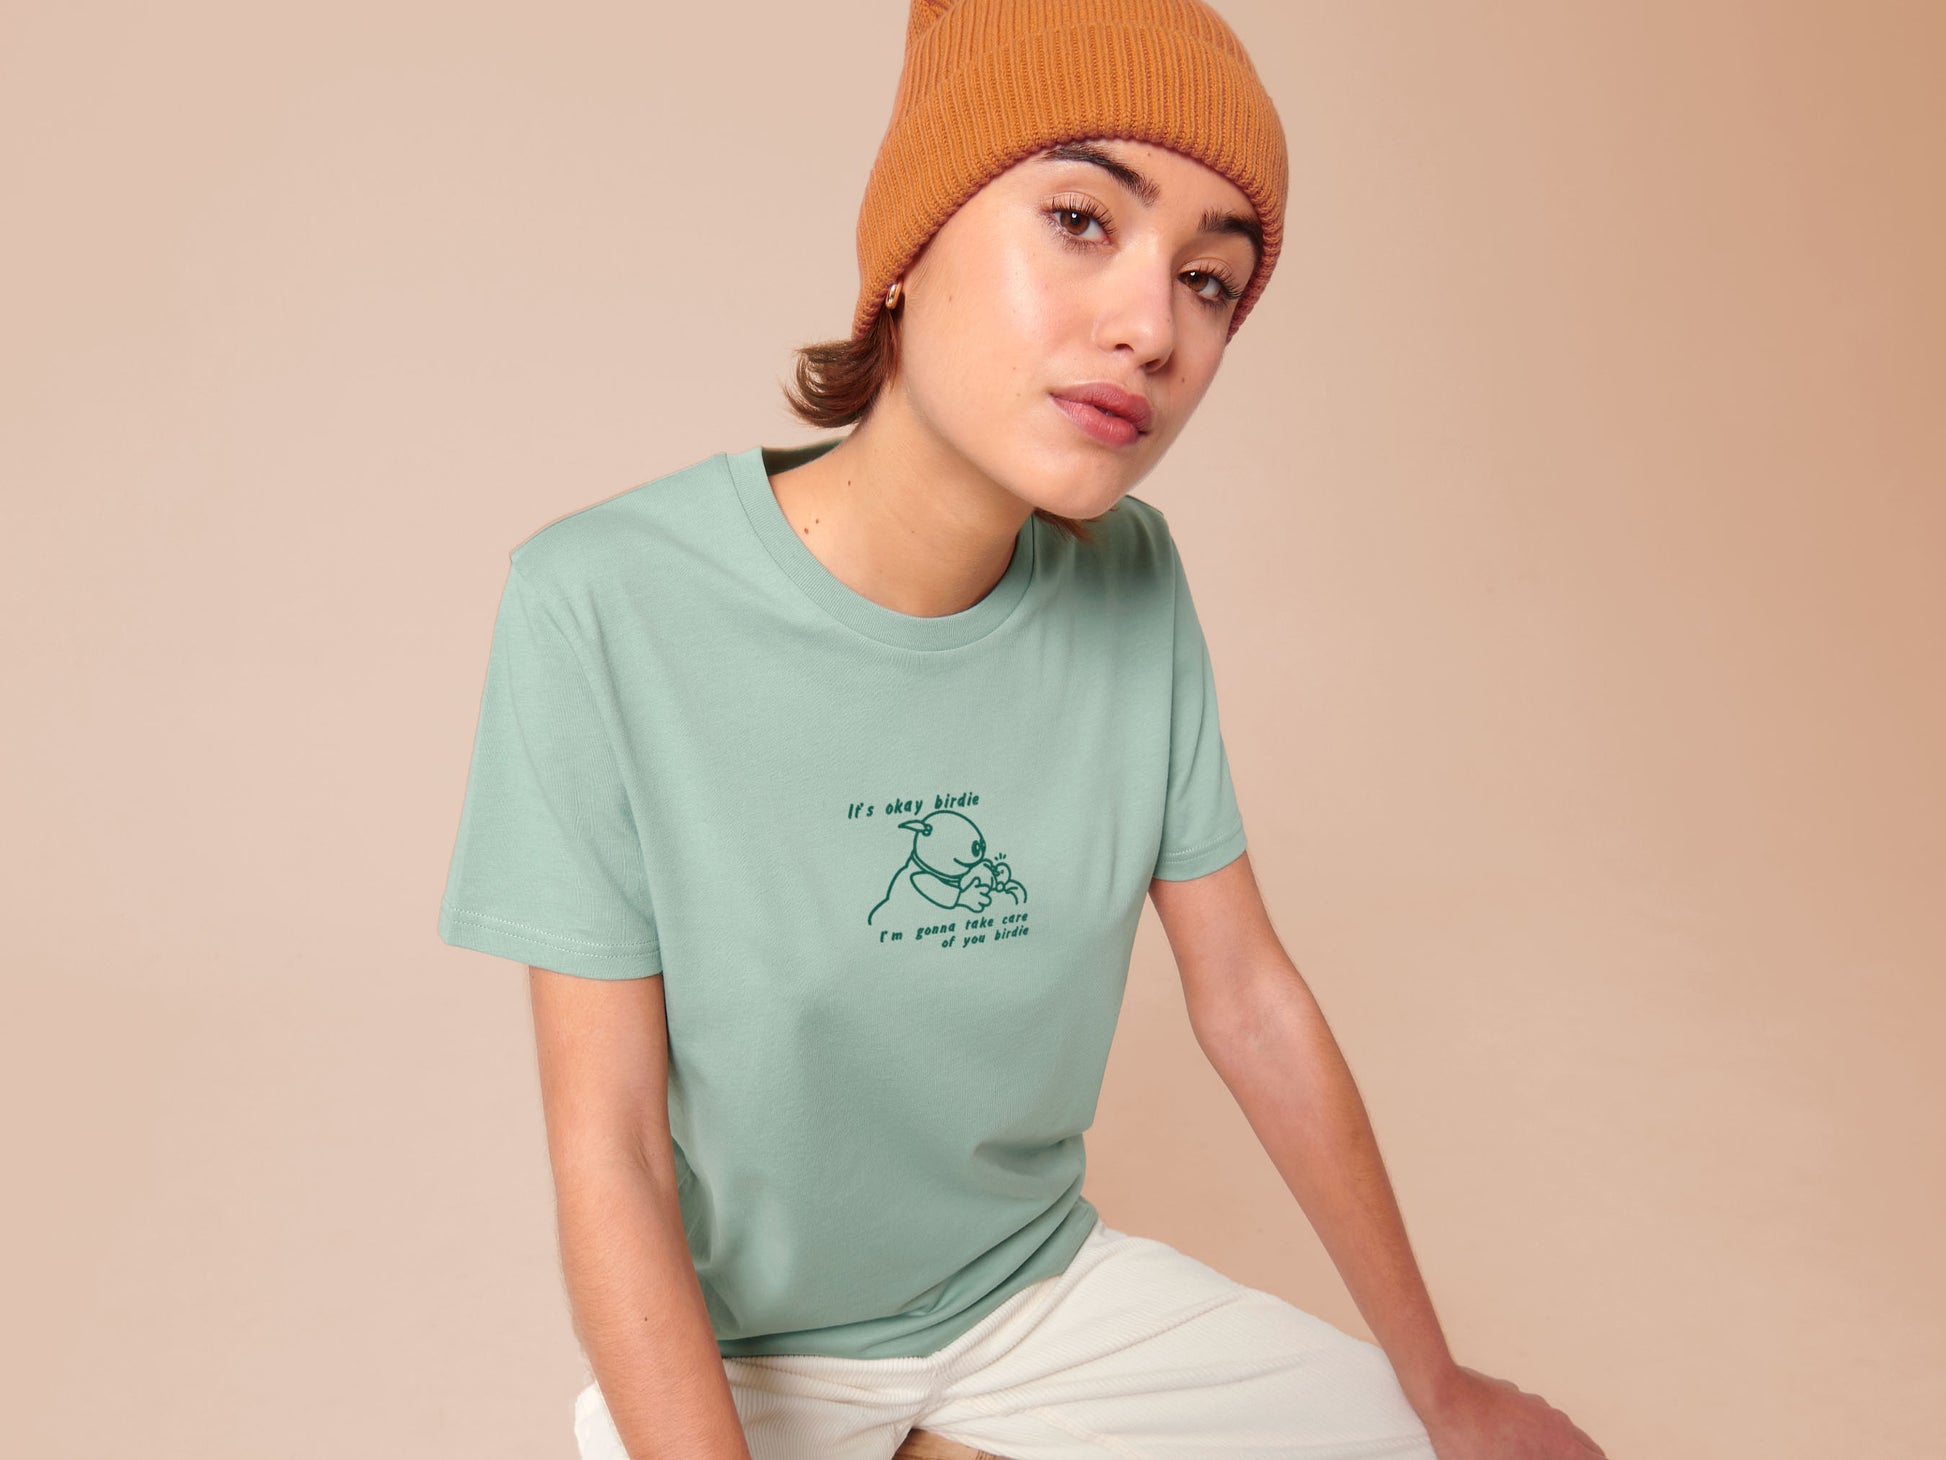 Woman wearing a green embroidered short sleeved t-shirt design of Mona from Nanalan comforting Birdie with the text It's okay Birdie I'm gonna take care of you birdie